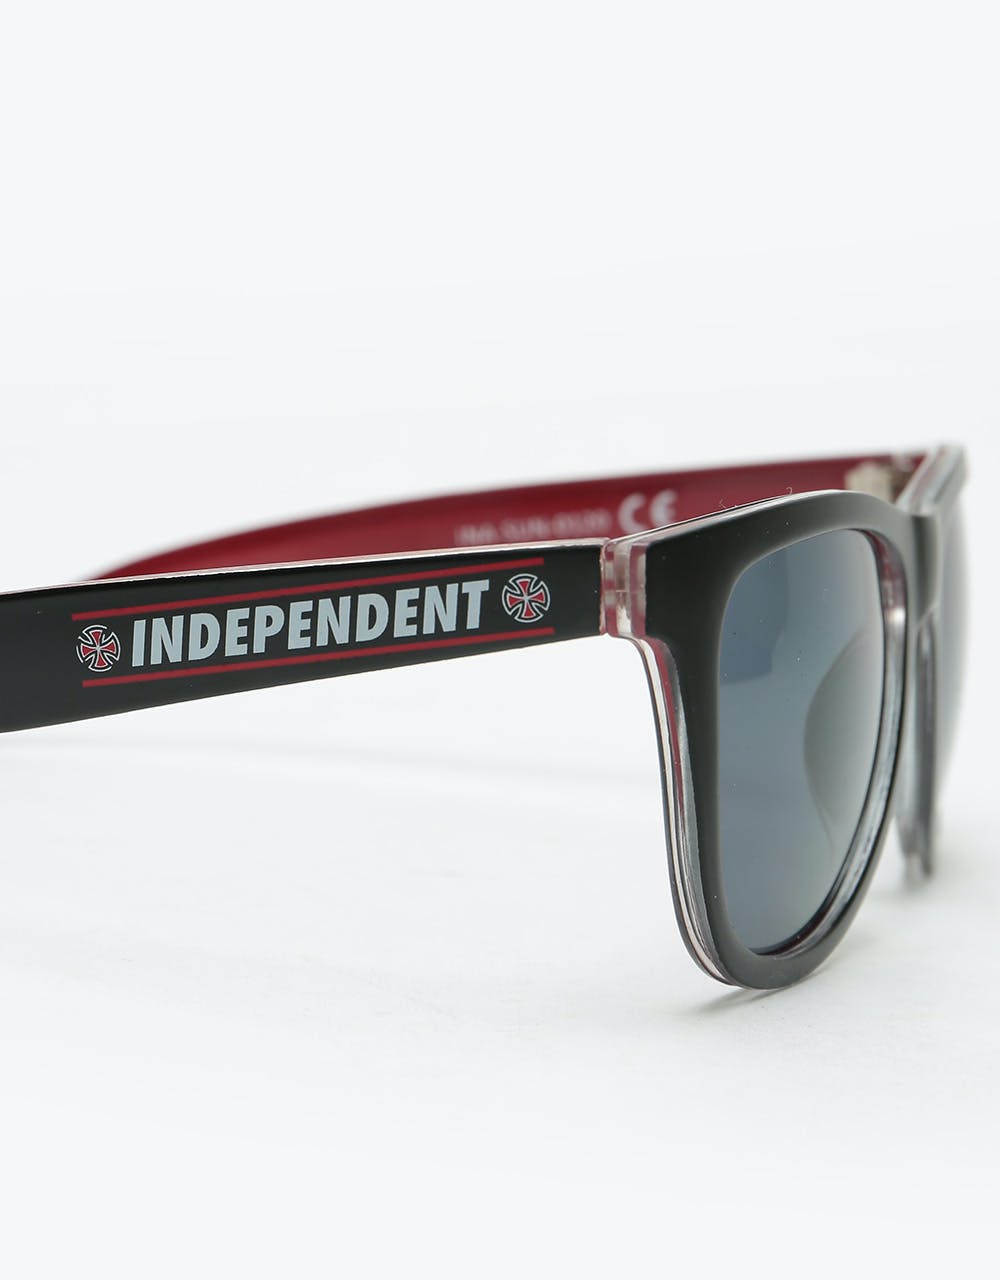 Independent Shear Sunglasses - Black/Red